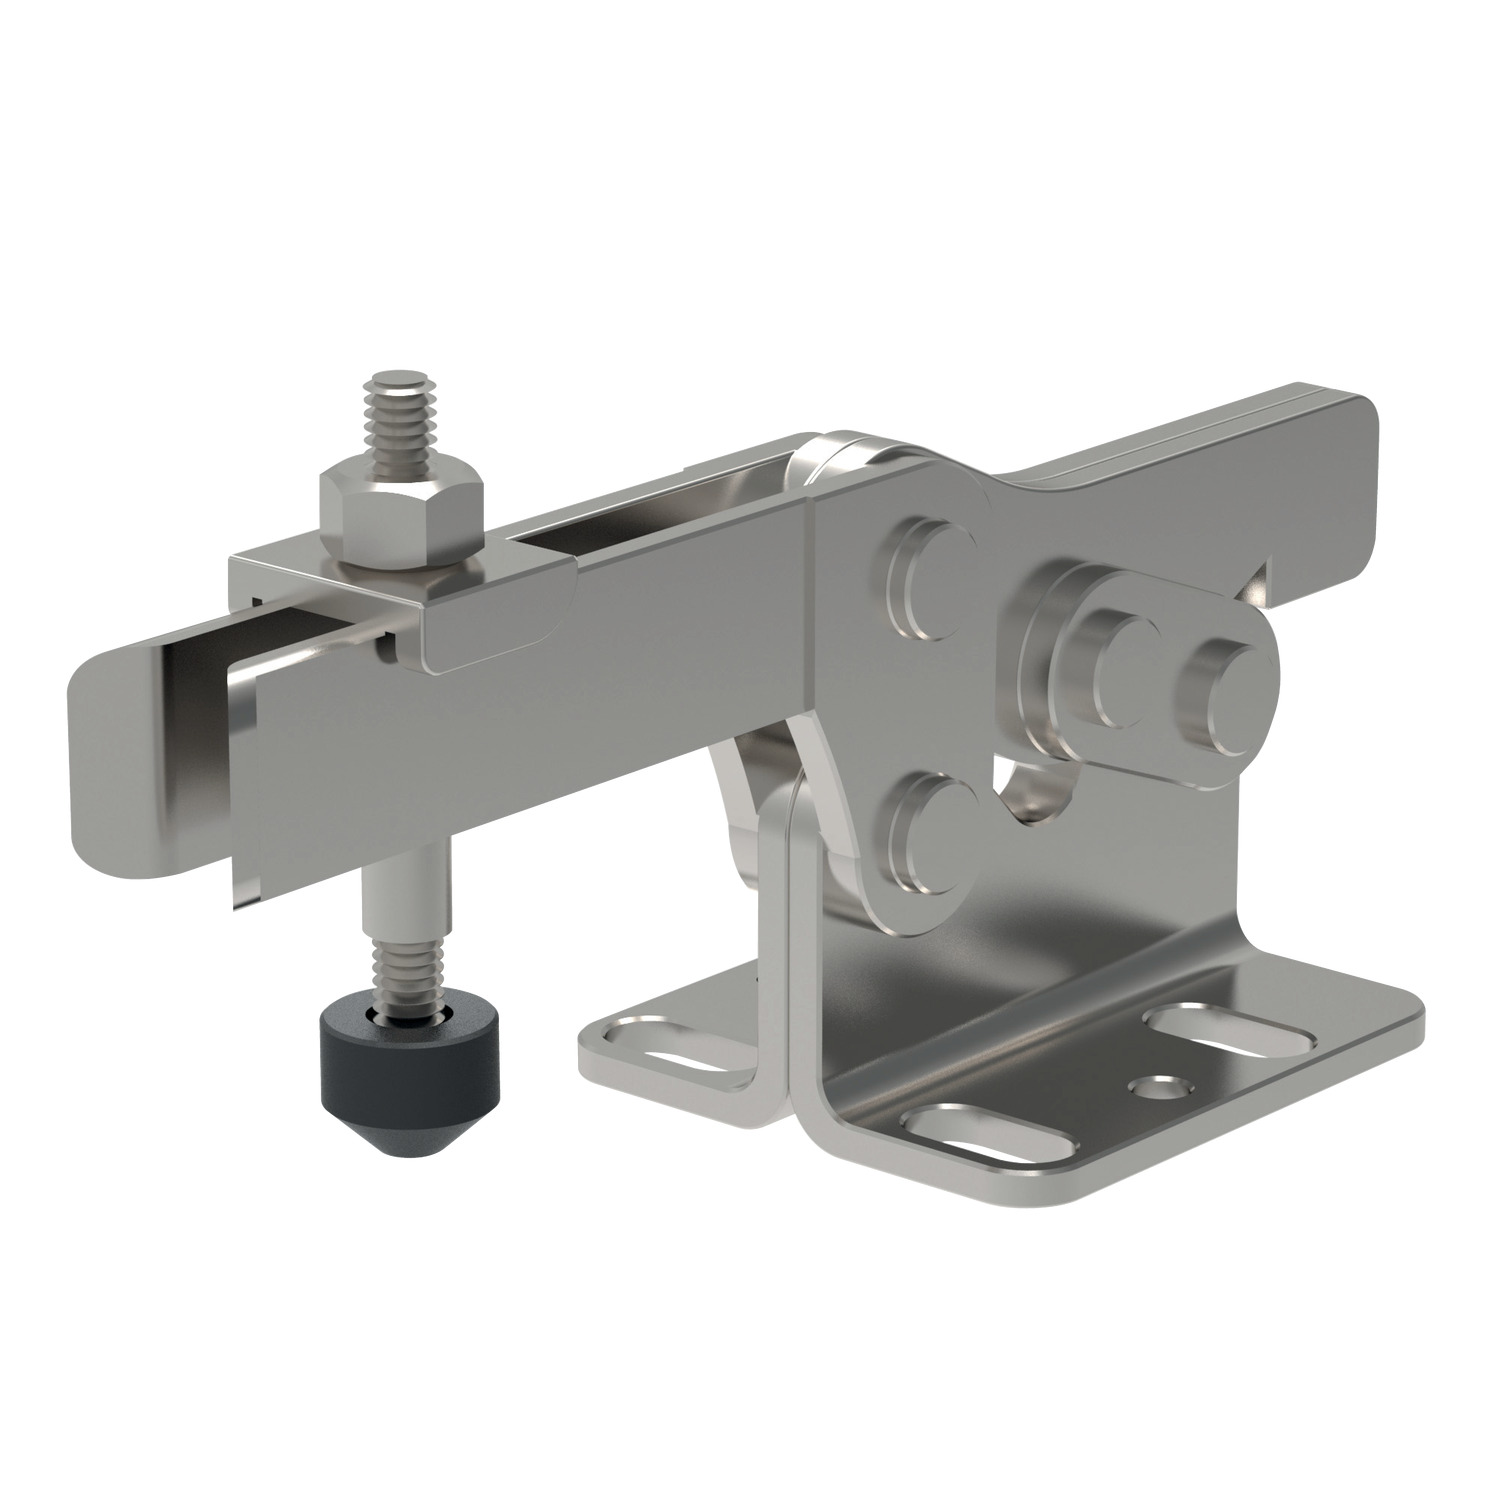 41005.1 - Horizontal Acting Toggle Clamps